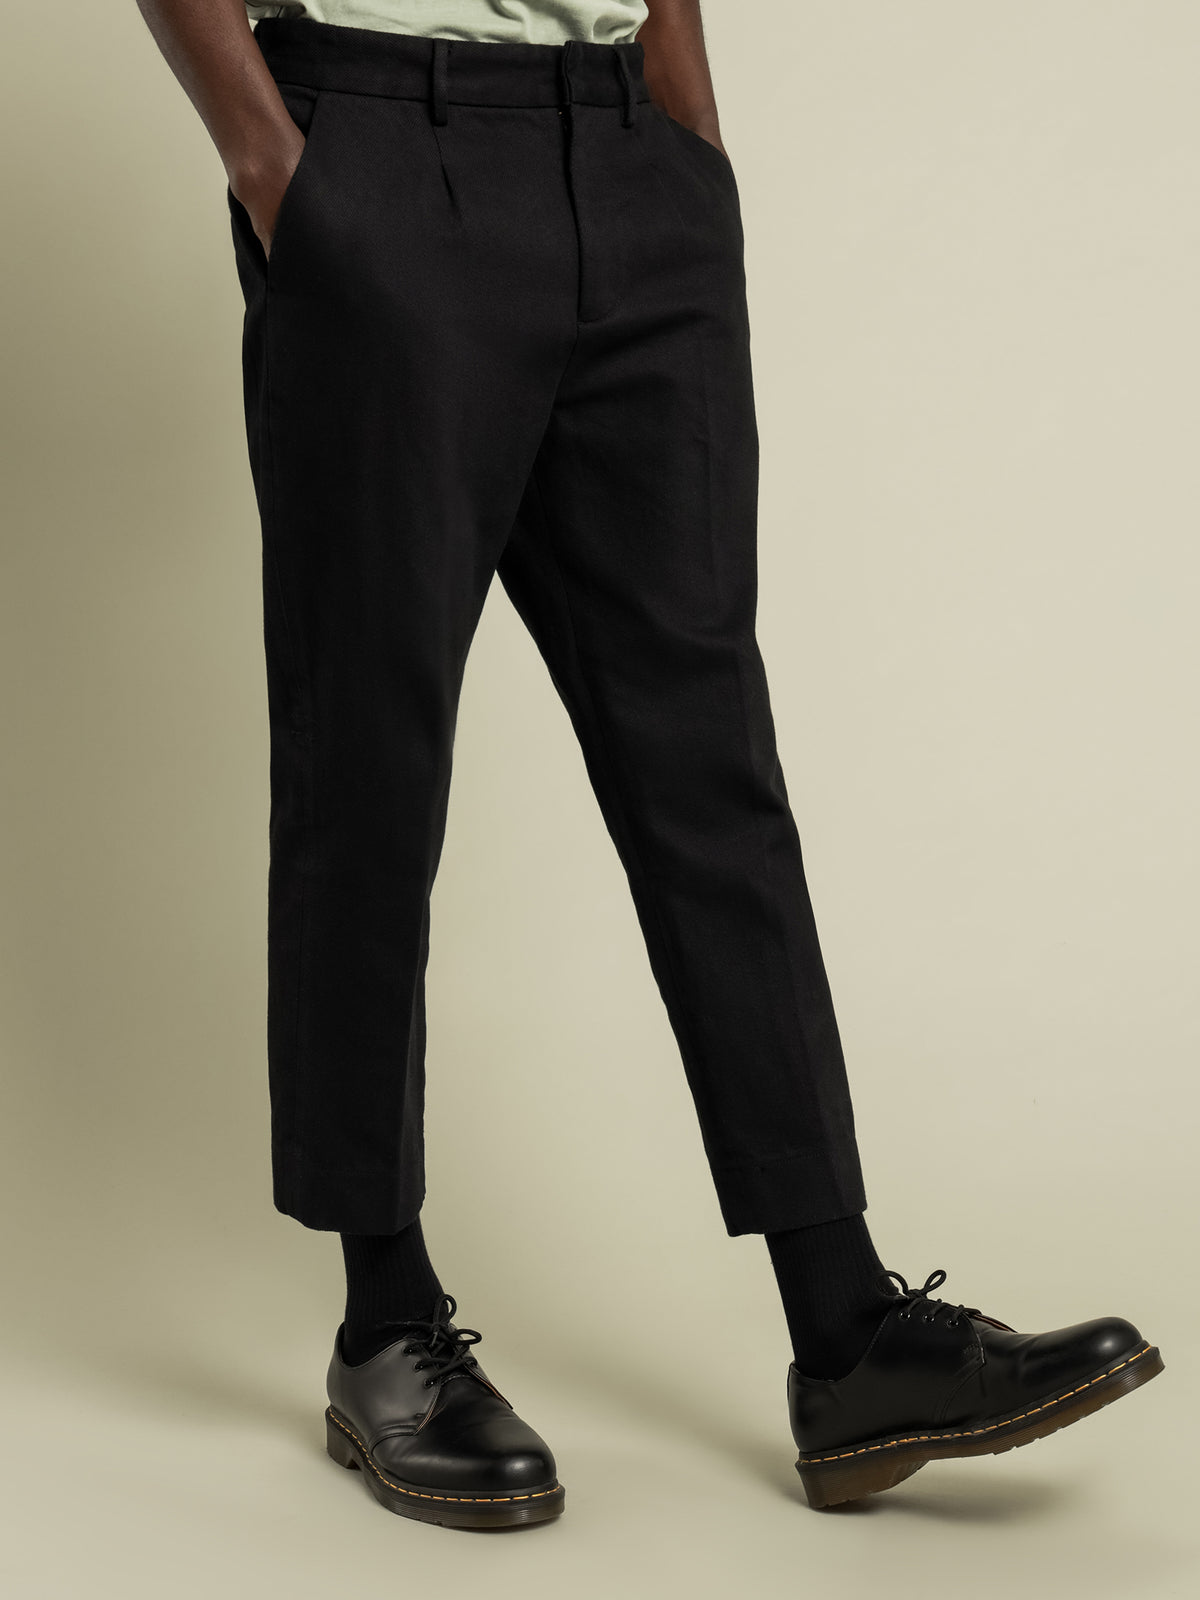 Occasion Pants in Black